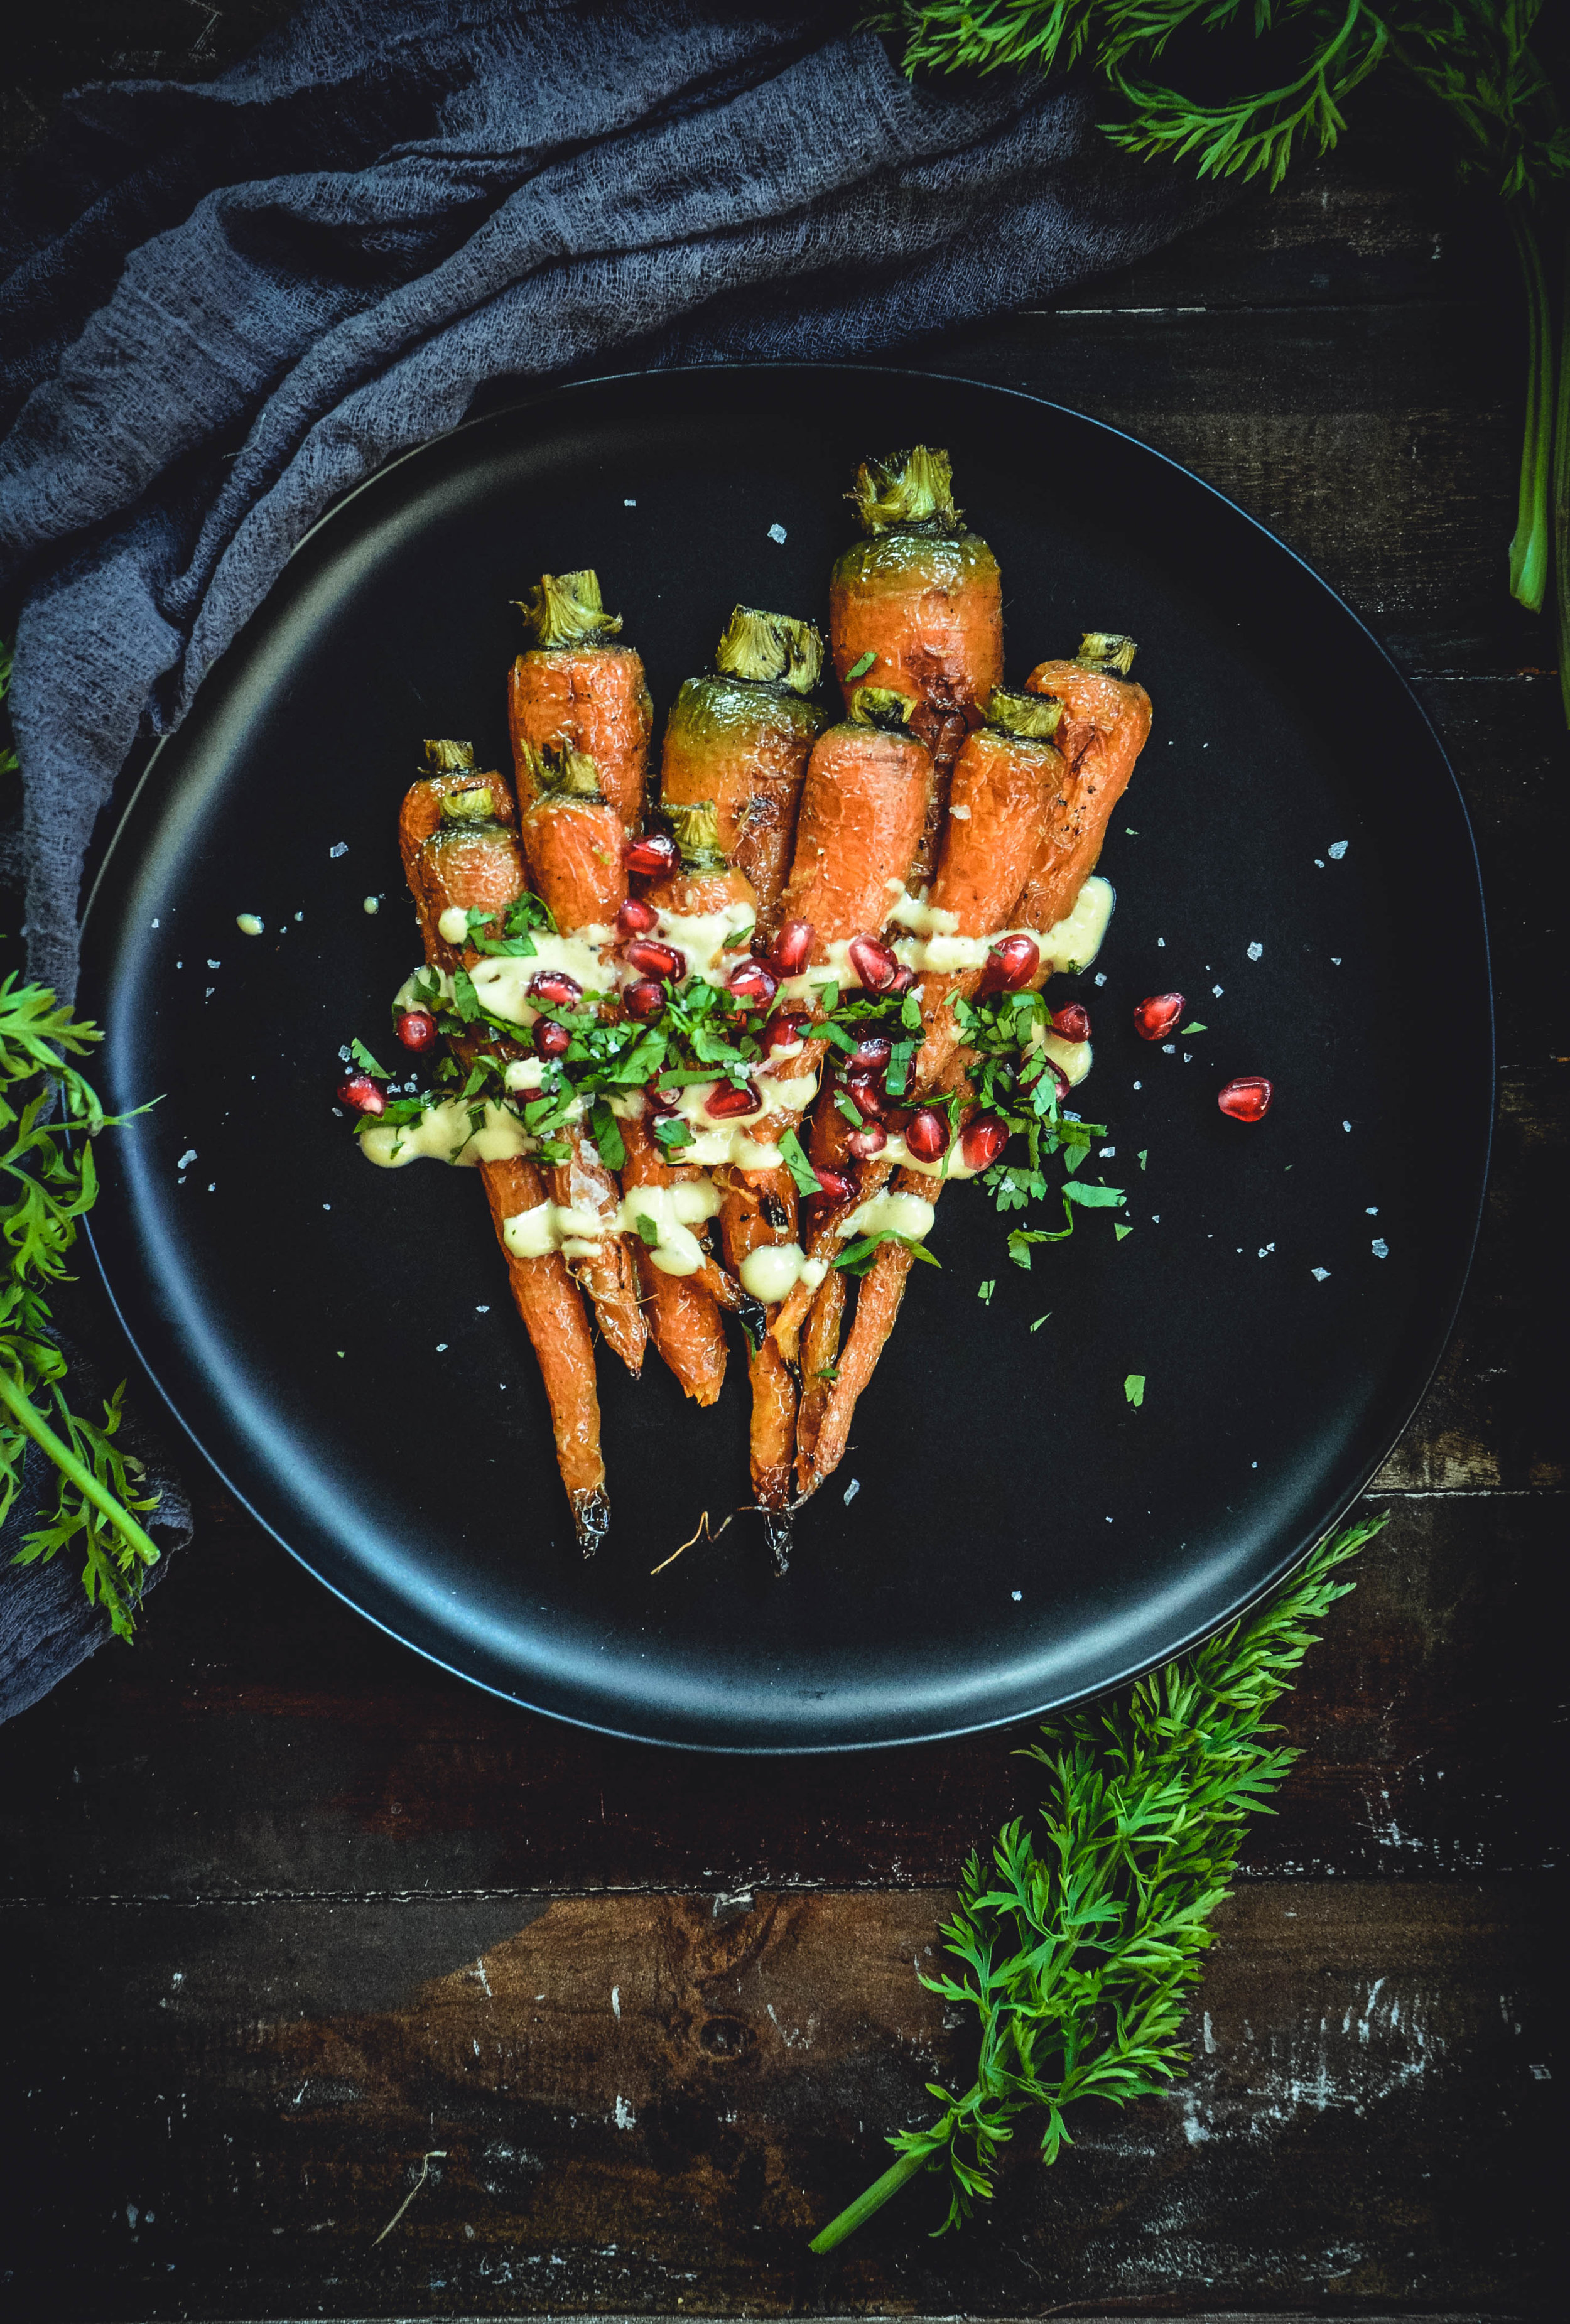 Roasted Carrots With A Simple Orange Tahini Sauce And Pomegranate on black plate with napkin and carrot greens